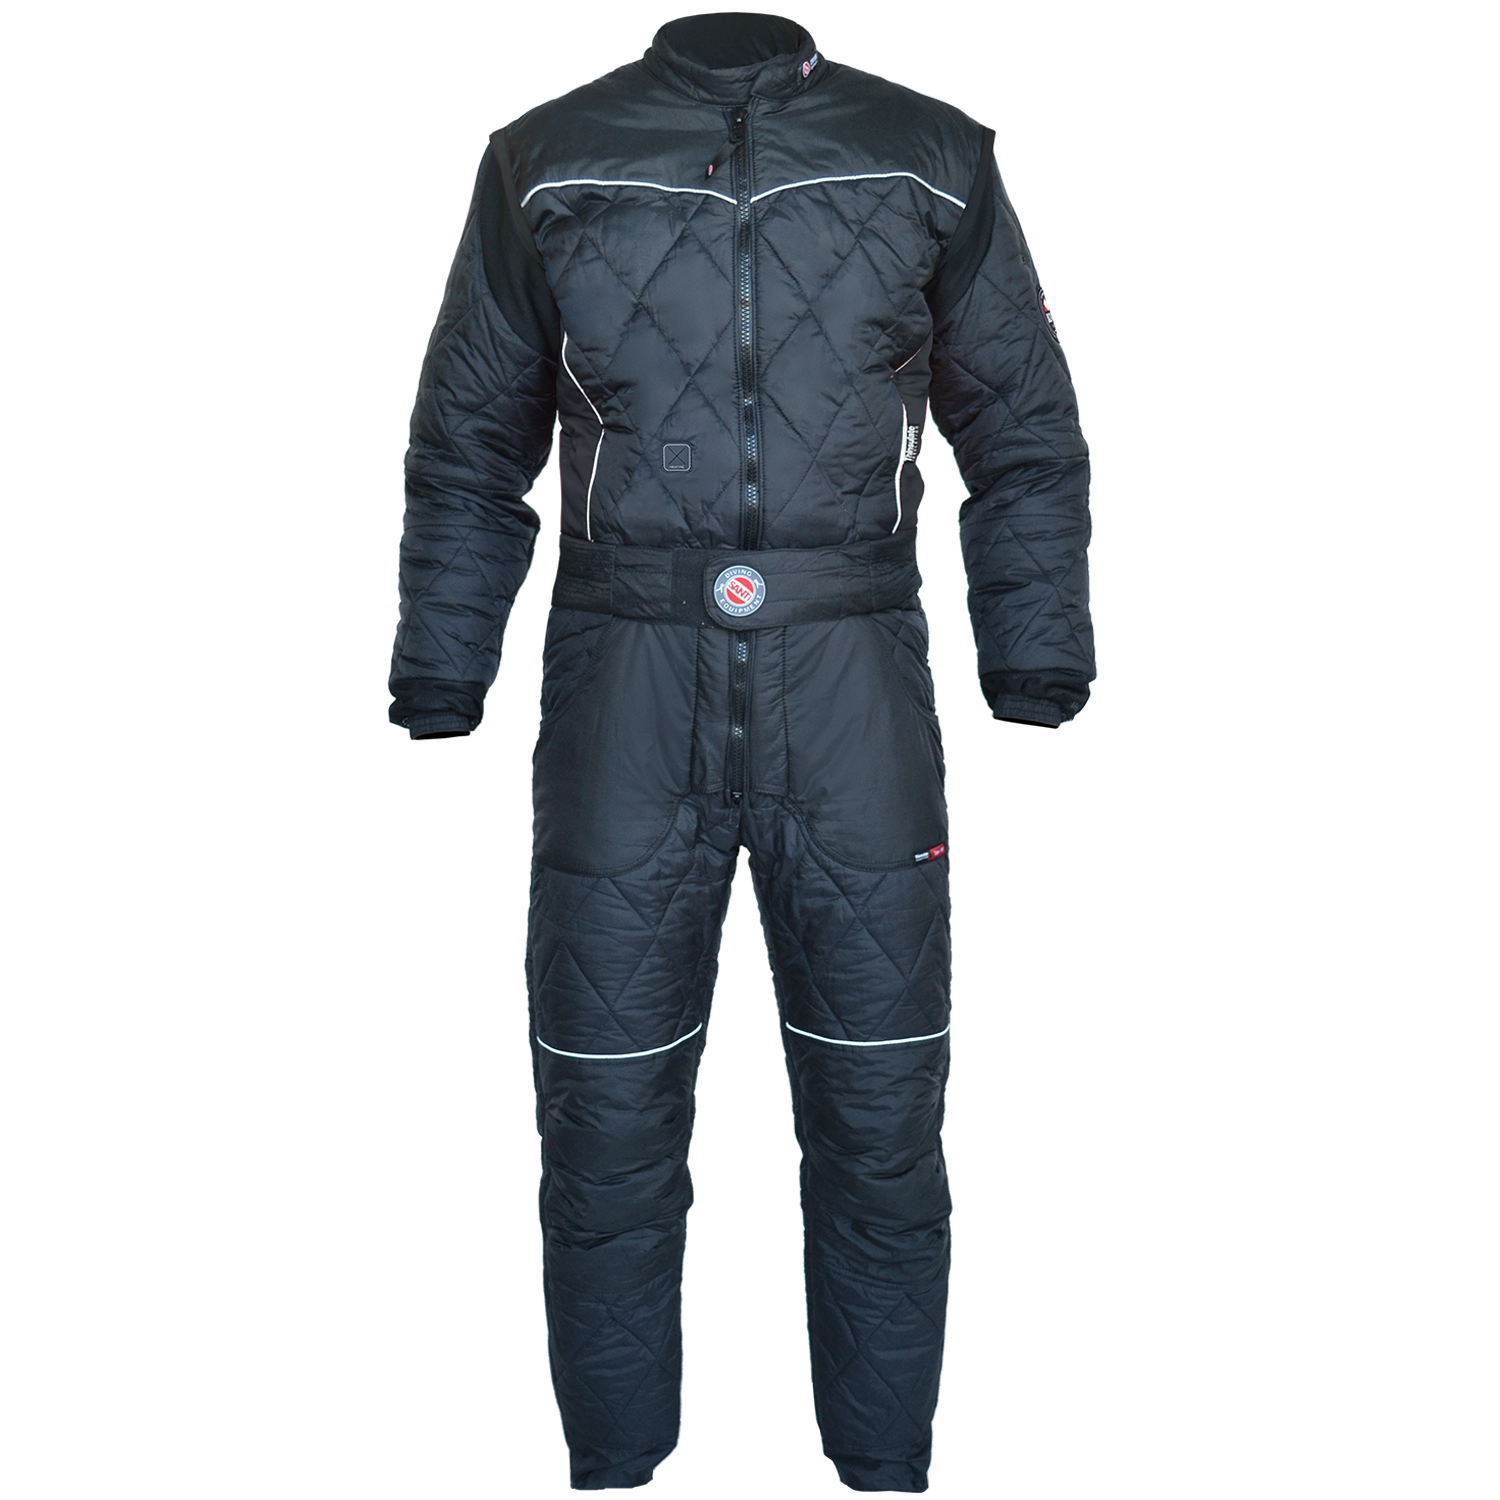 Heated Gloves, Heated Undersuits, Undersuits and Clothing